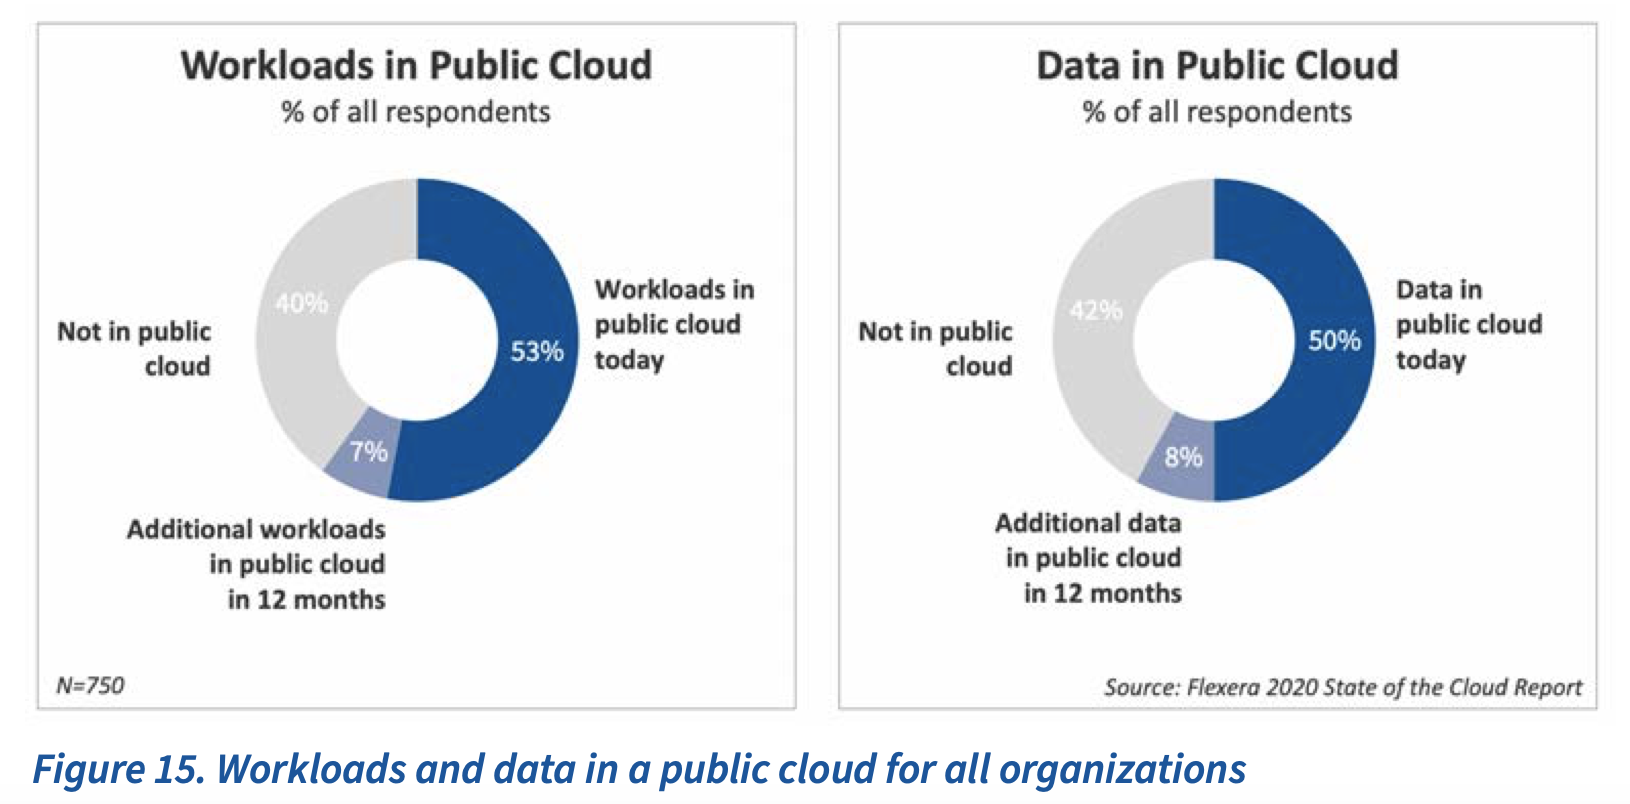 Workloads and data in a public cloud for all organizations